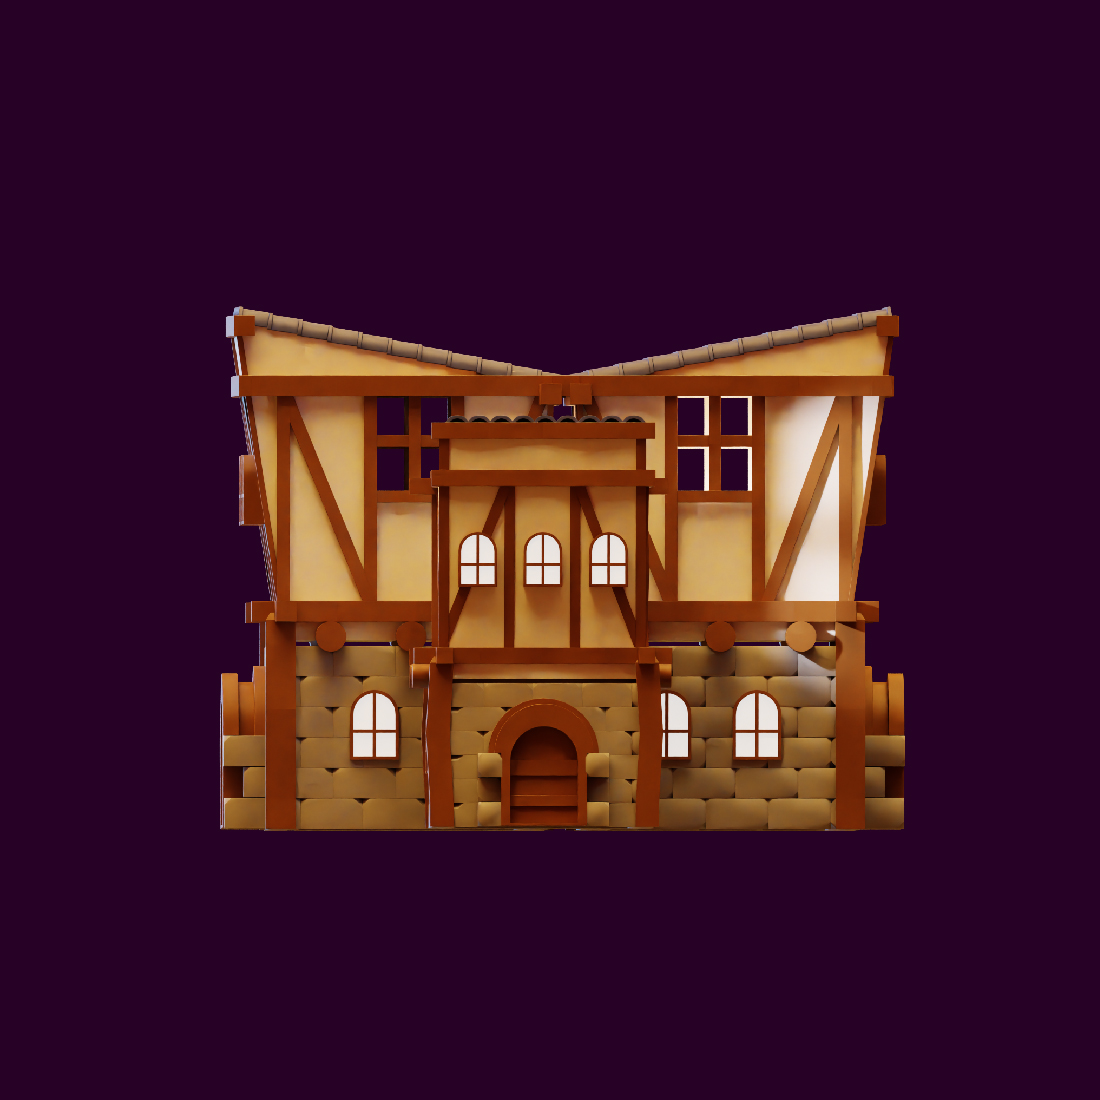 3D HOUSE BUILDING LOWPOLY RENDER with some view preview image.